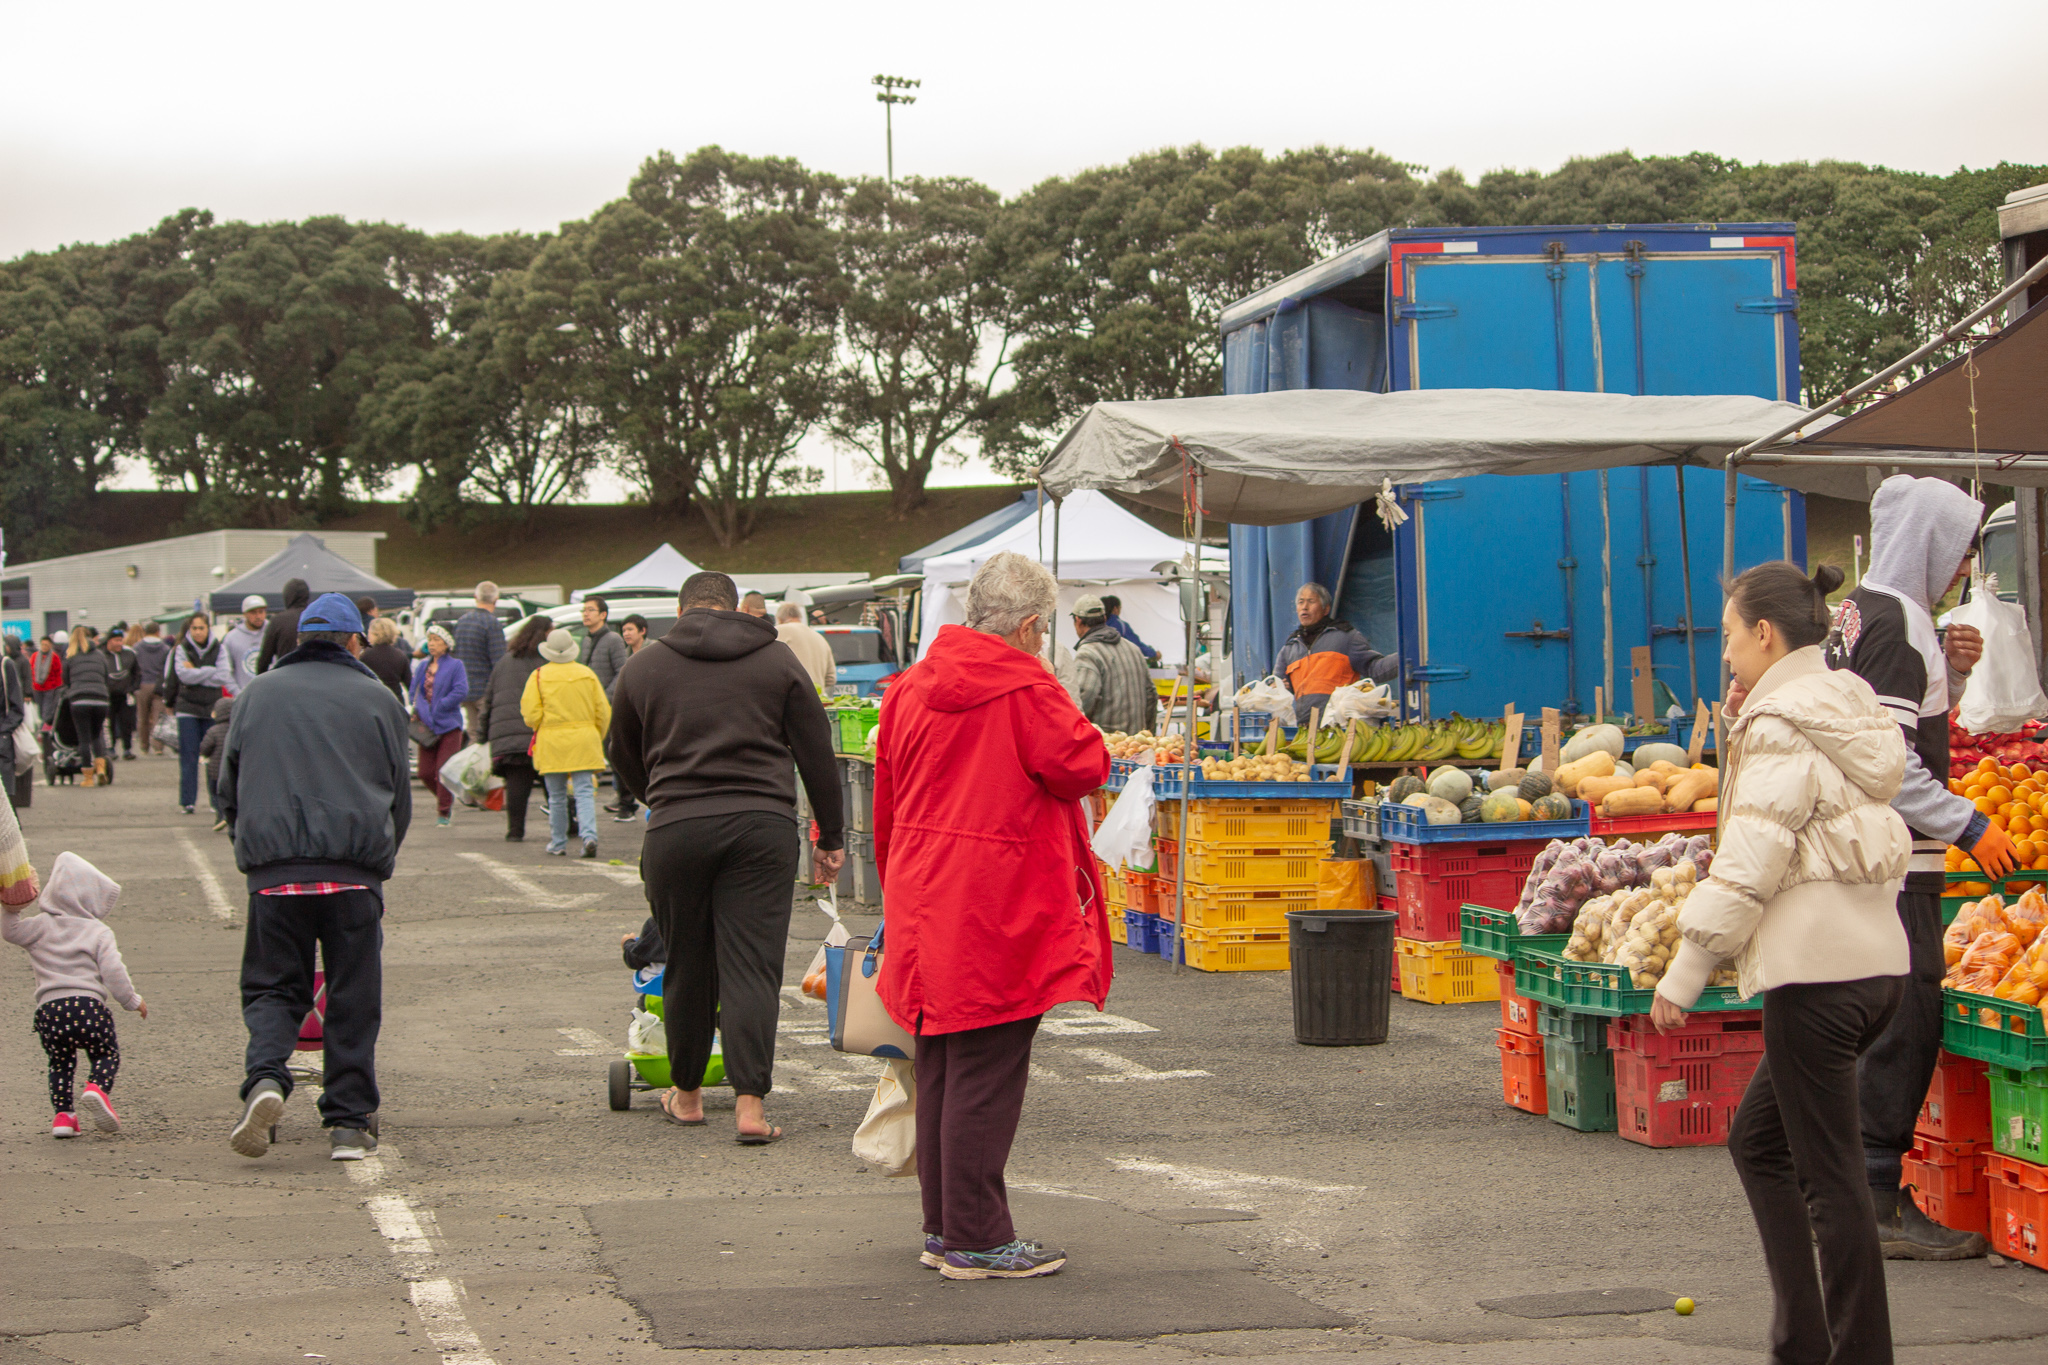 auckland markets on sunday filled with people and stallholders